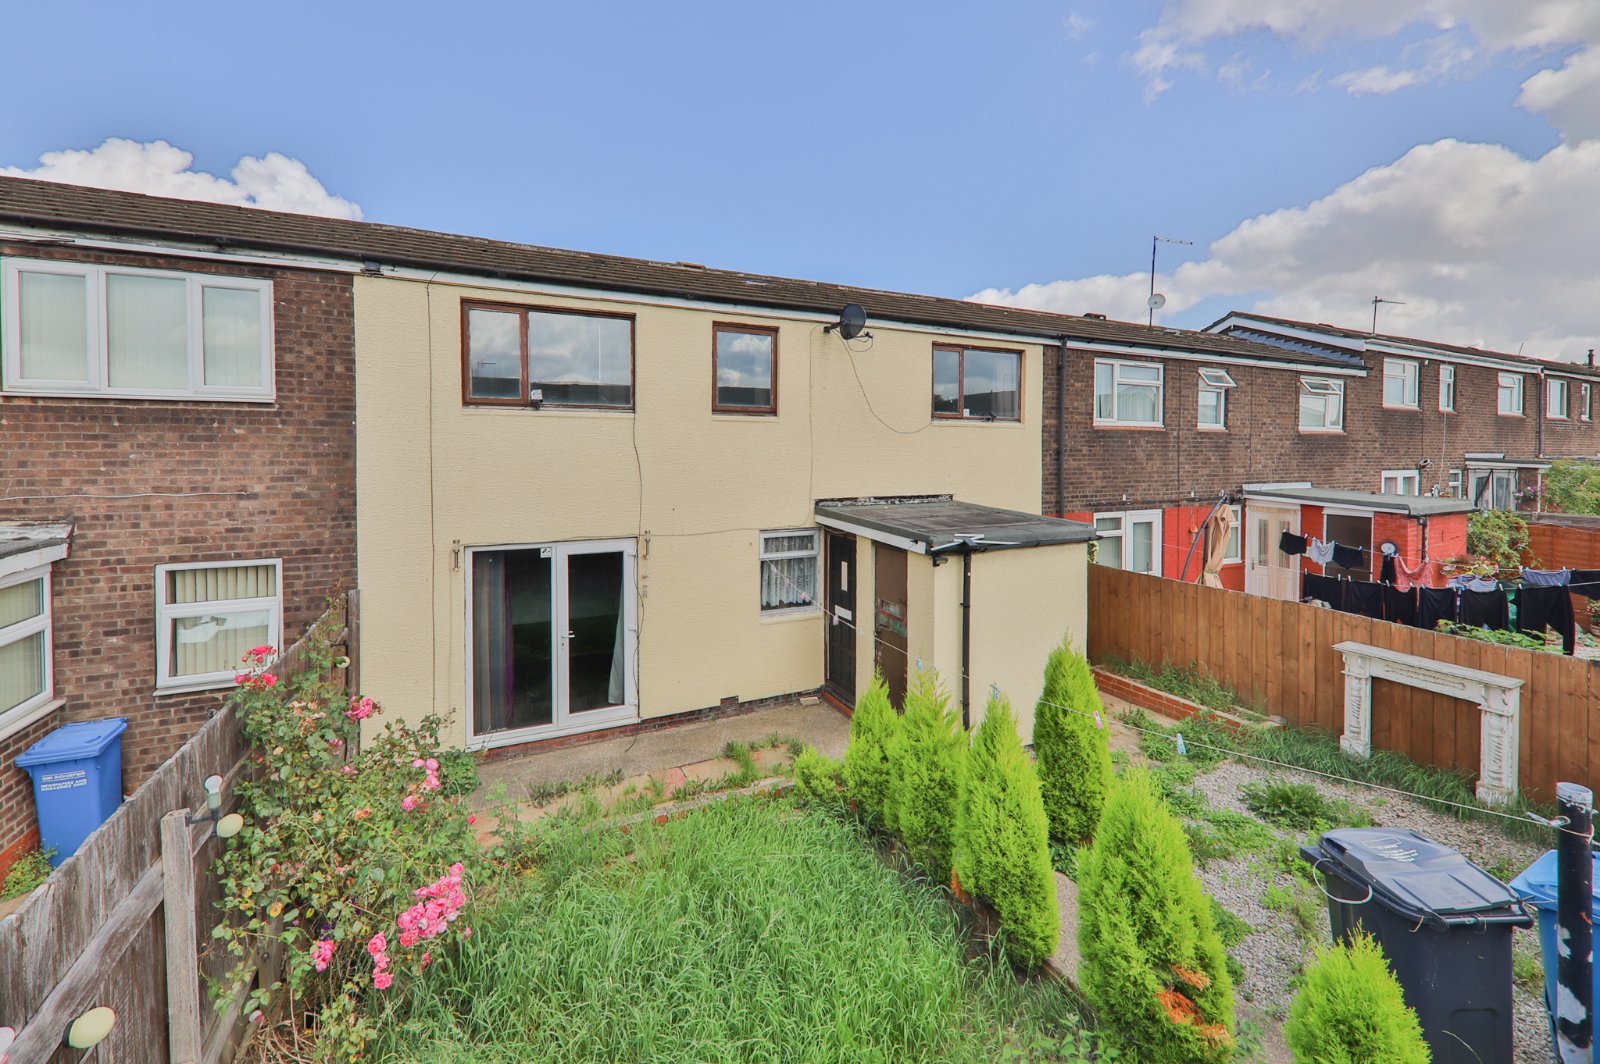 3 bed house for sale in Sheldon Close, Bransholme - Property Image 1